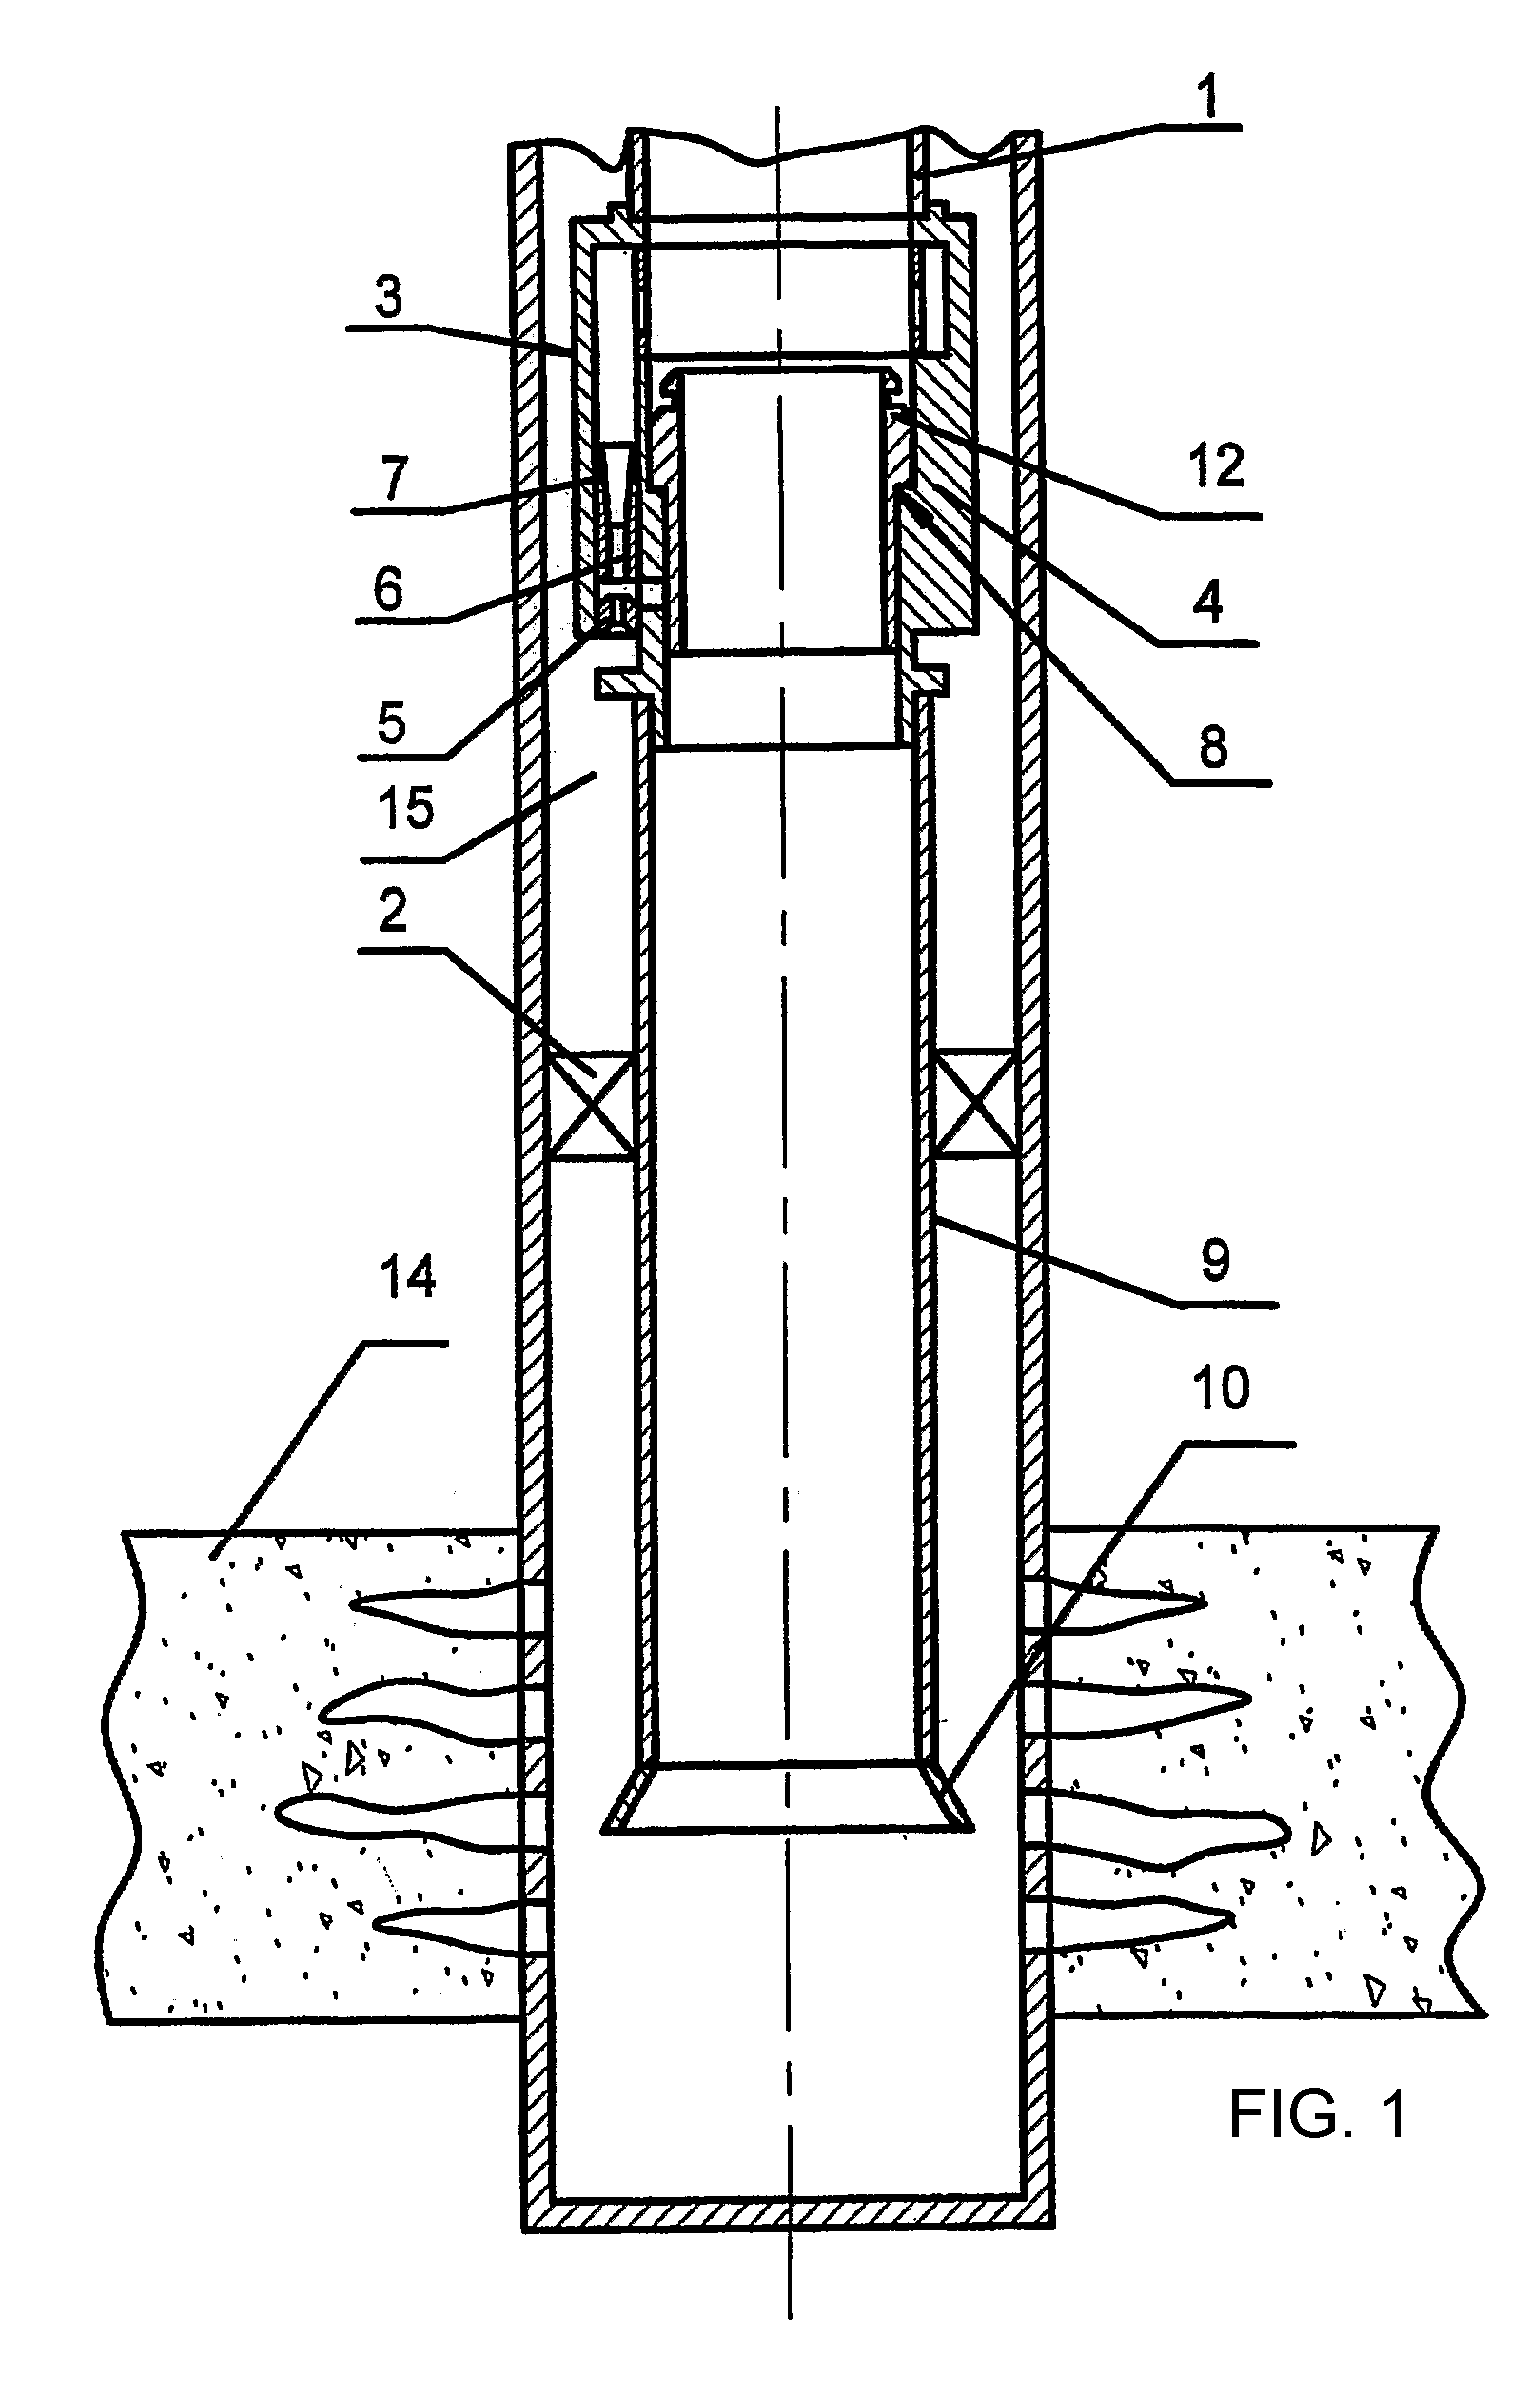 Method for Operating a Well Jet Device in the Conditions of a Formation Hydraulic Fracturing